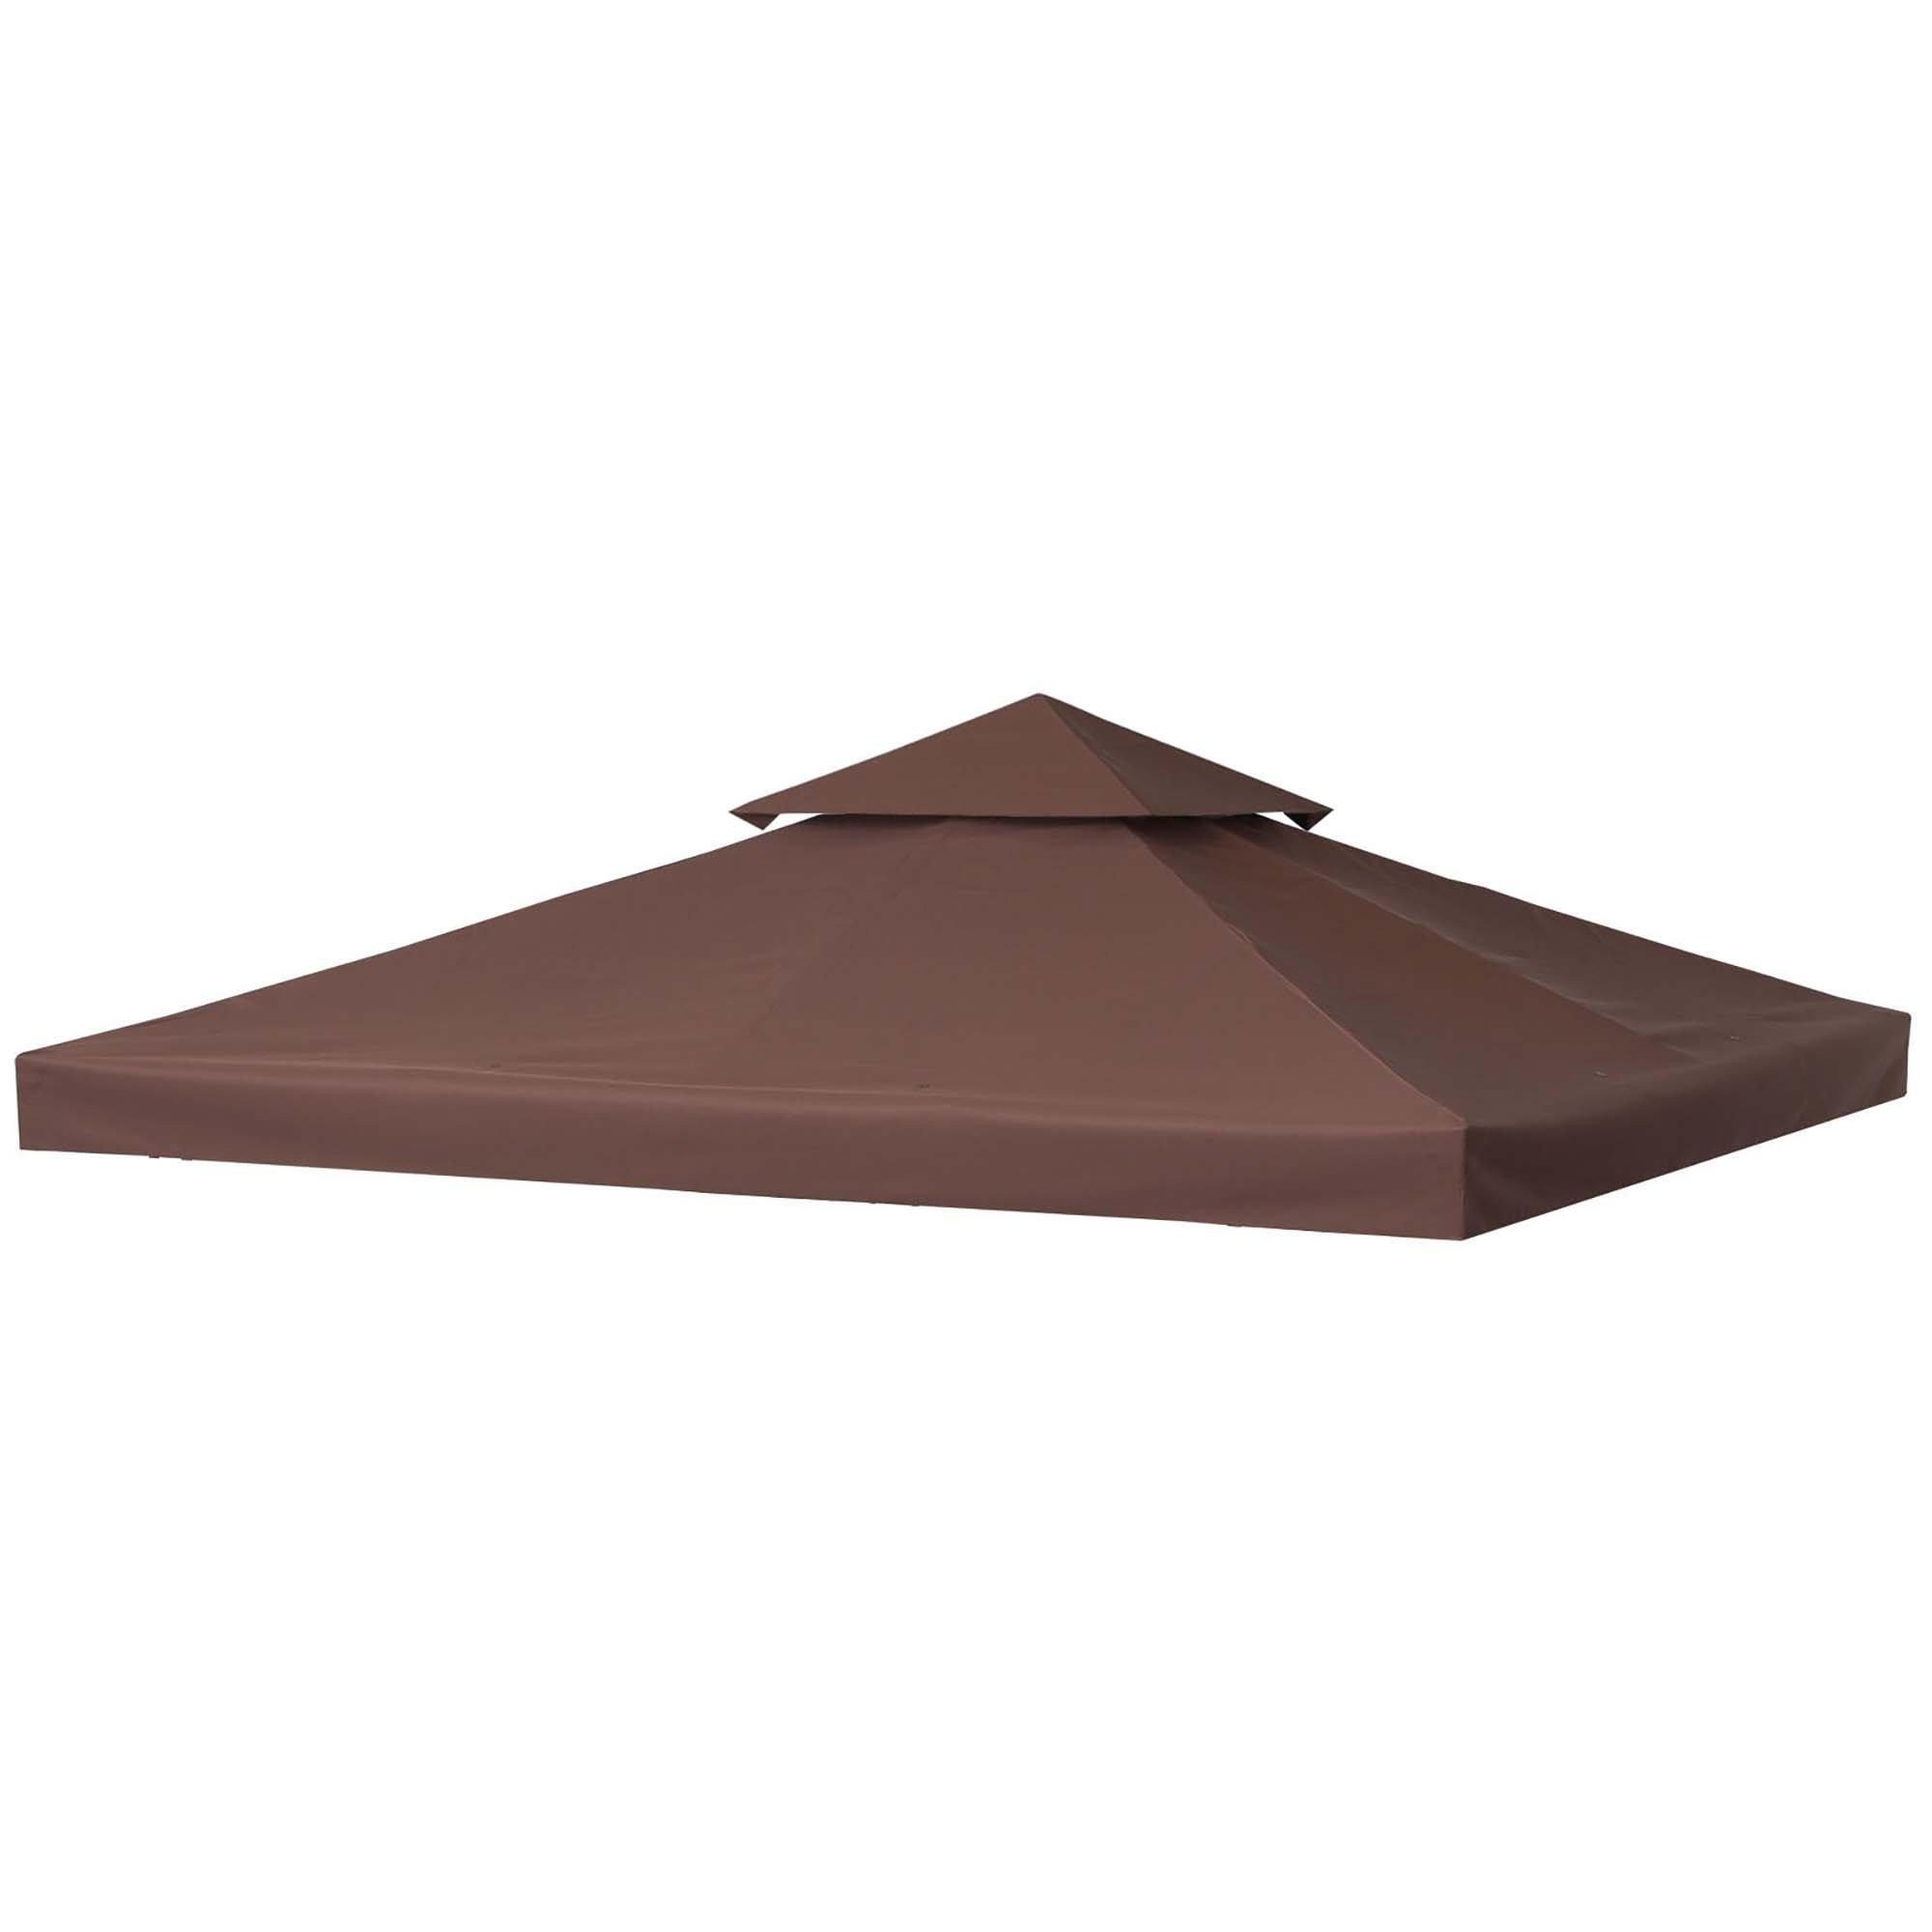 3Metre 2 Tier Garden Gazebo Top Cover Replacement Canopy Roof - image 1